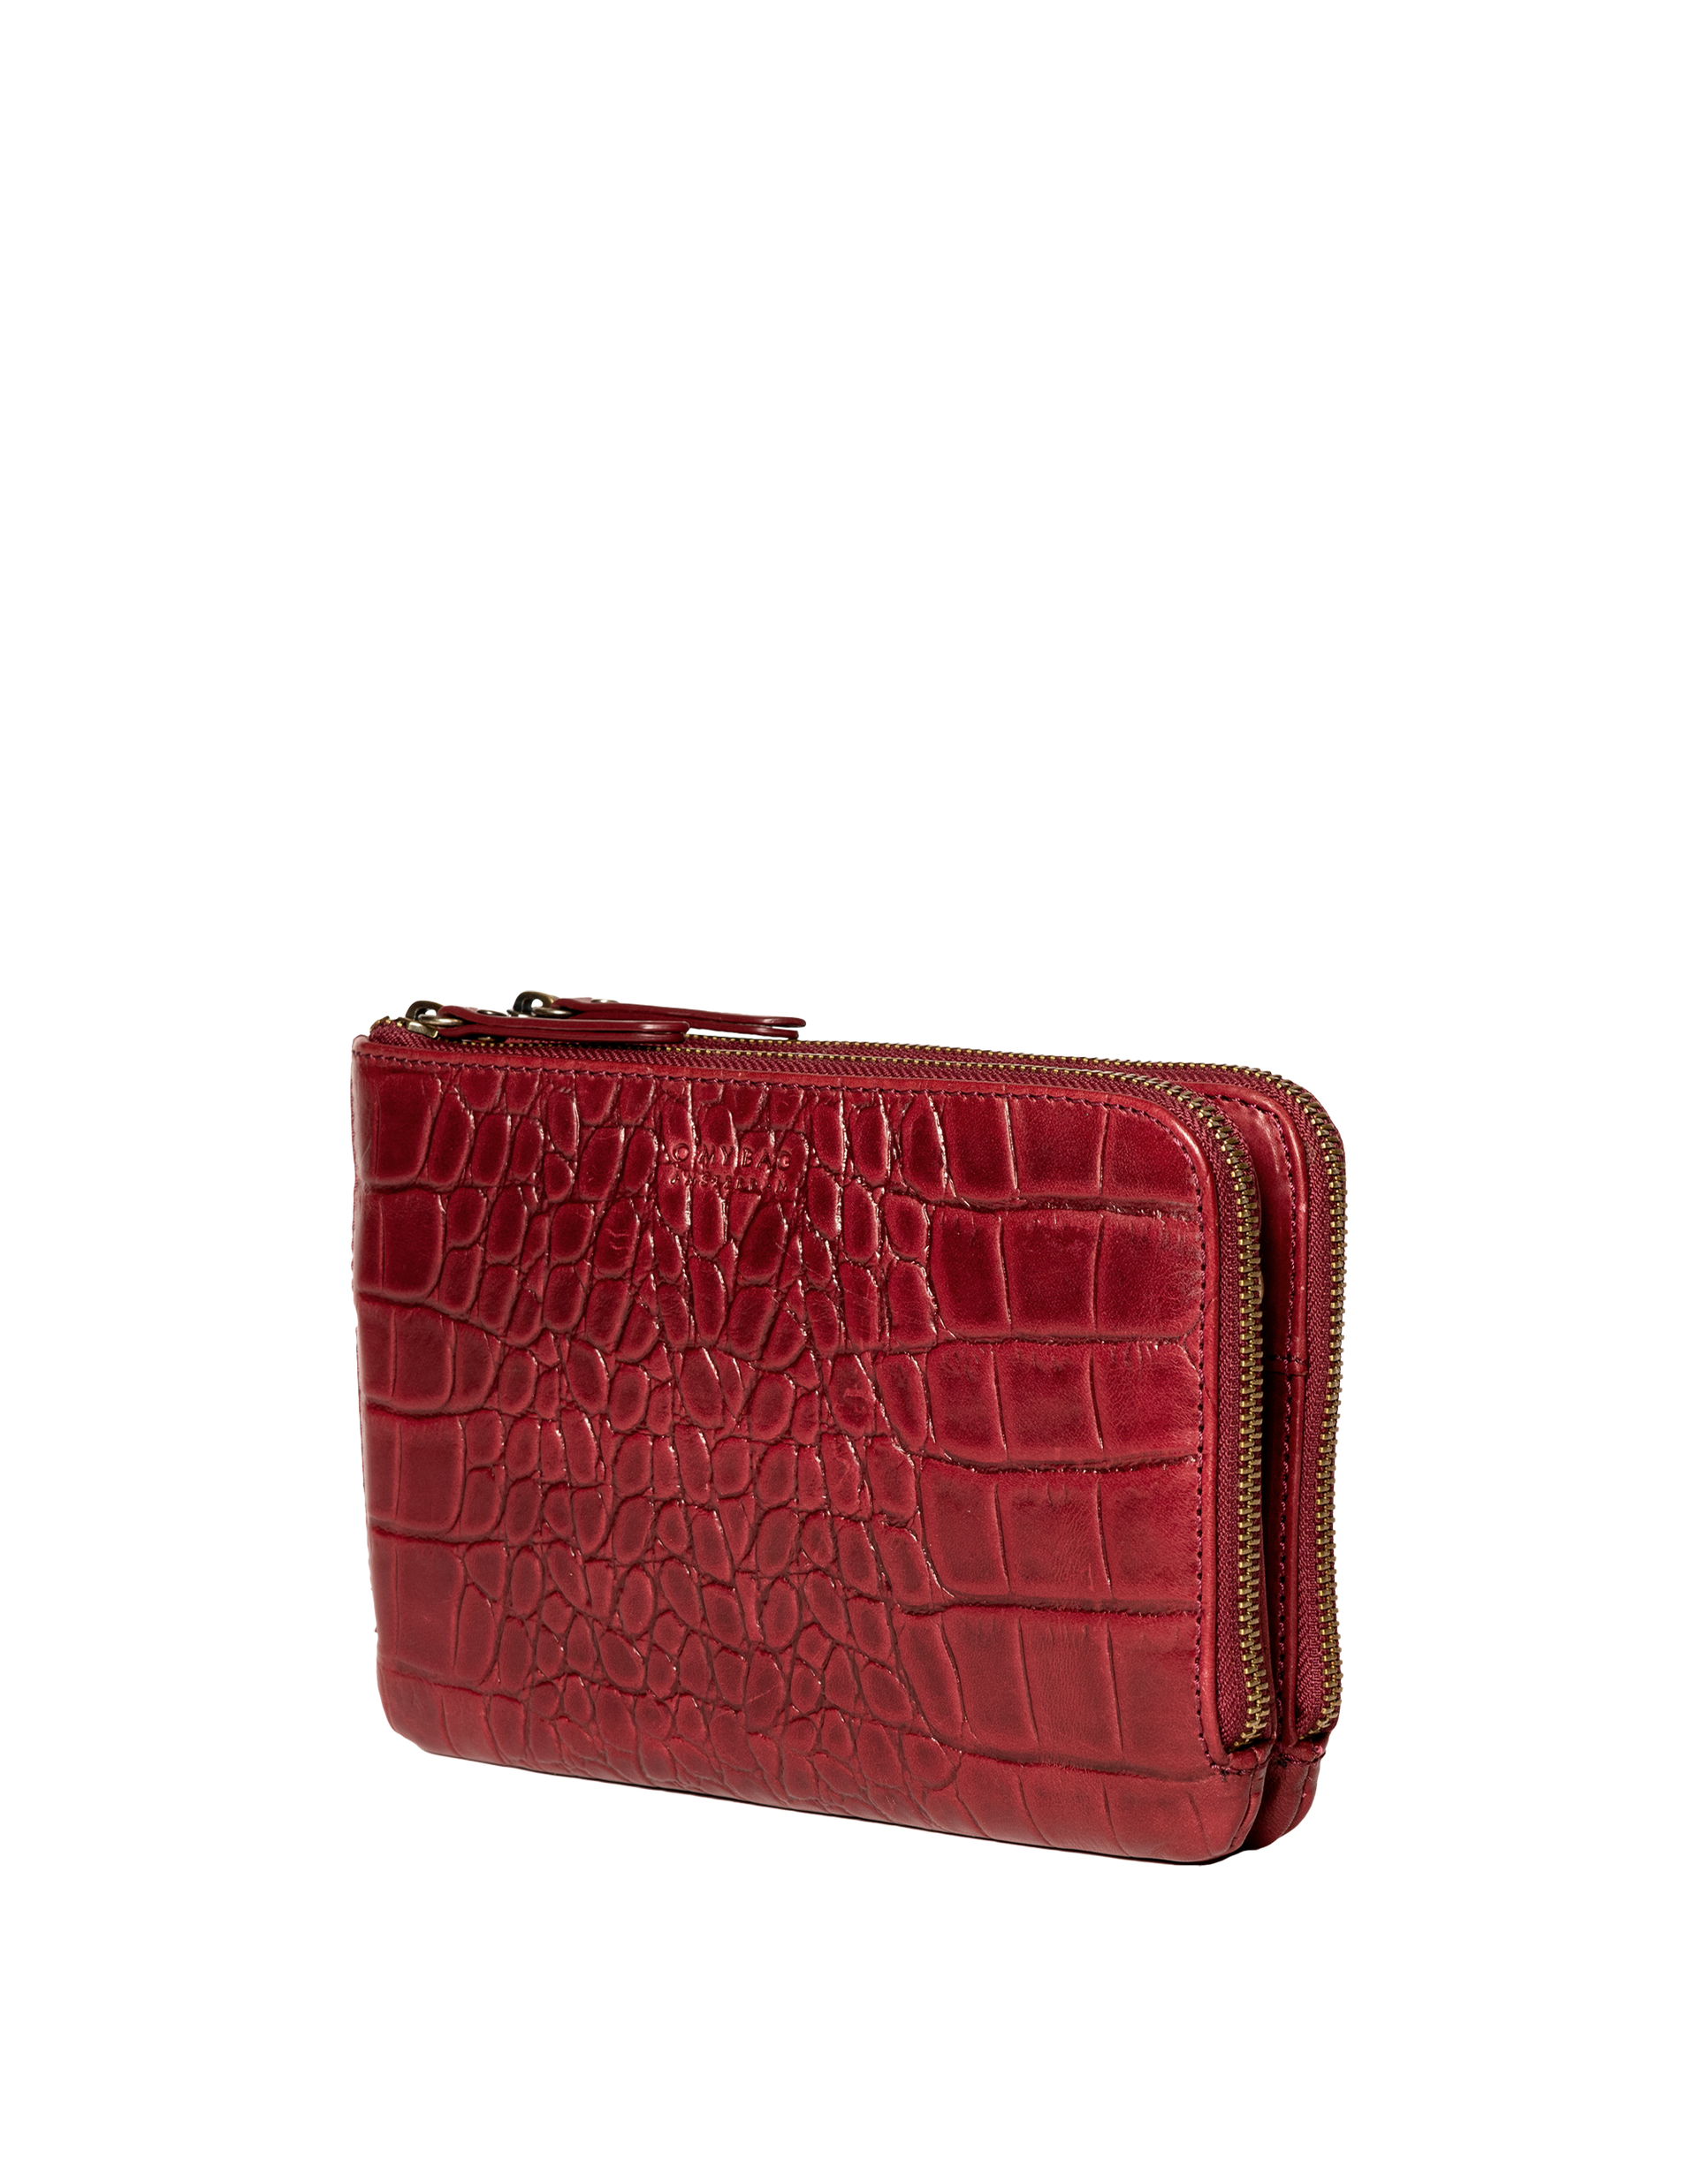 Lola Ruby Classic Croco Leather. Small Rectangular crossbody clutch bag for women with two zipper compartments. Side product image.